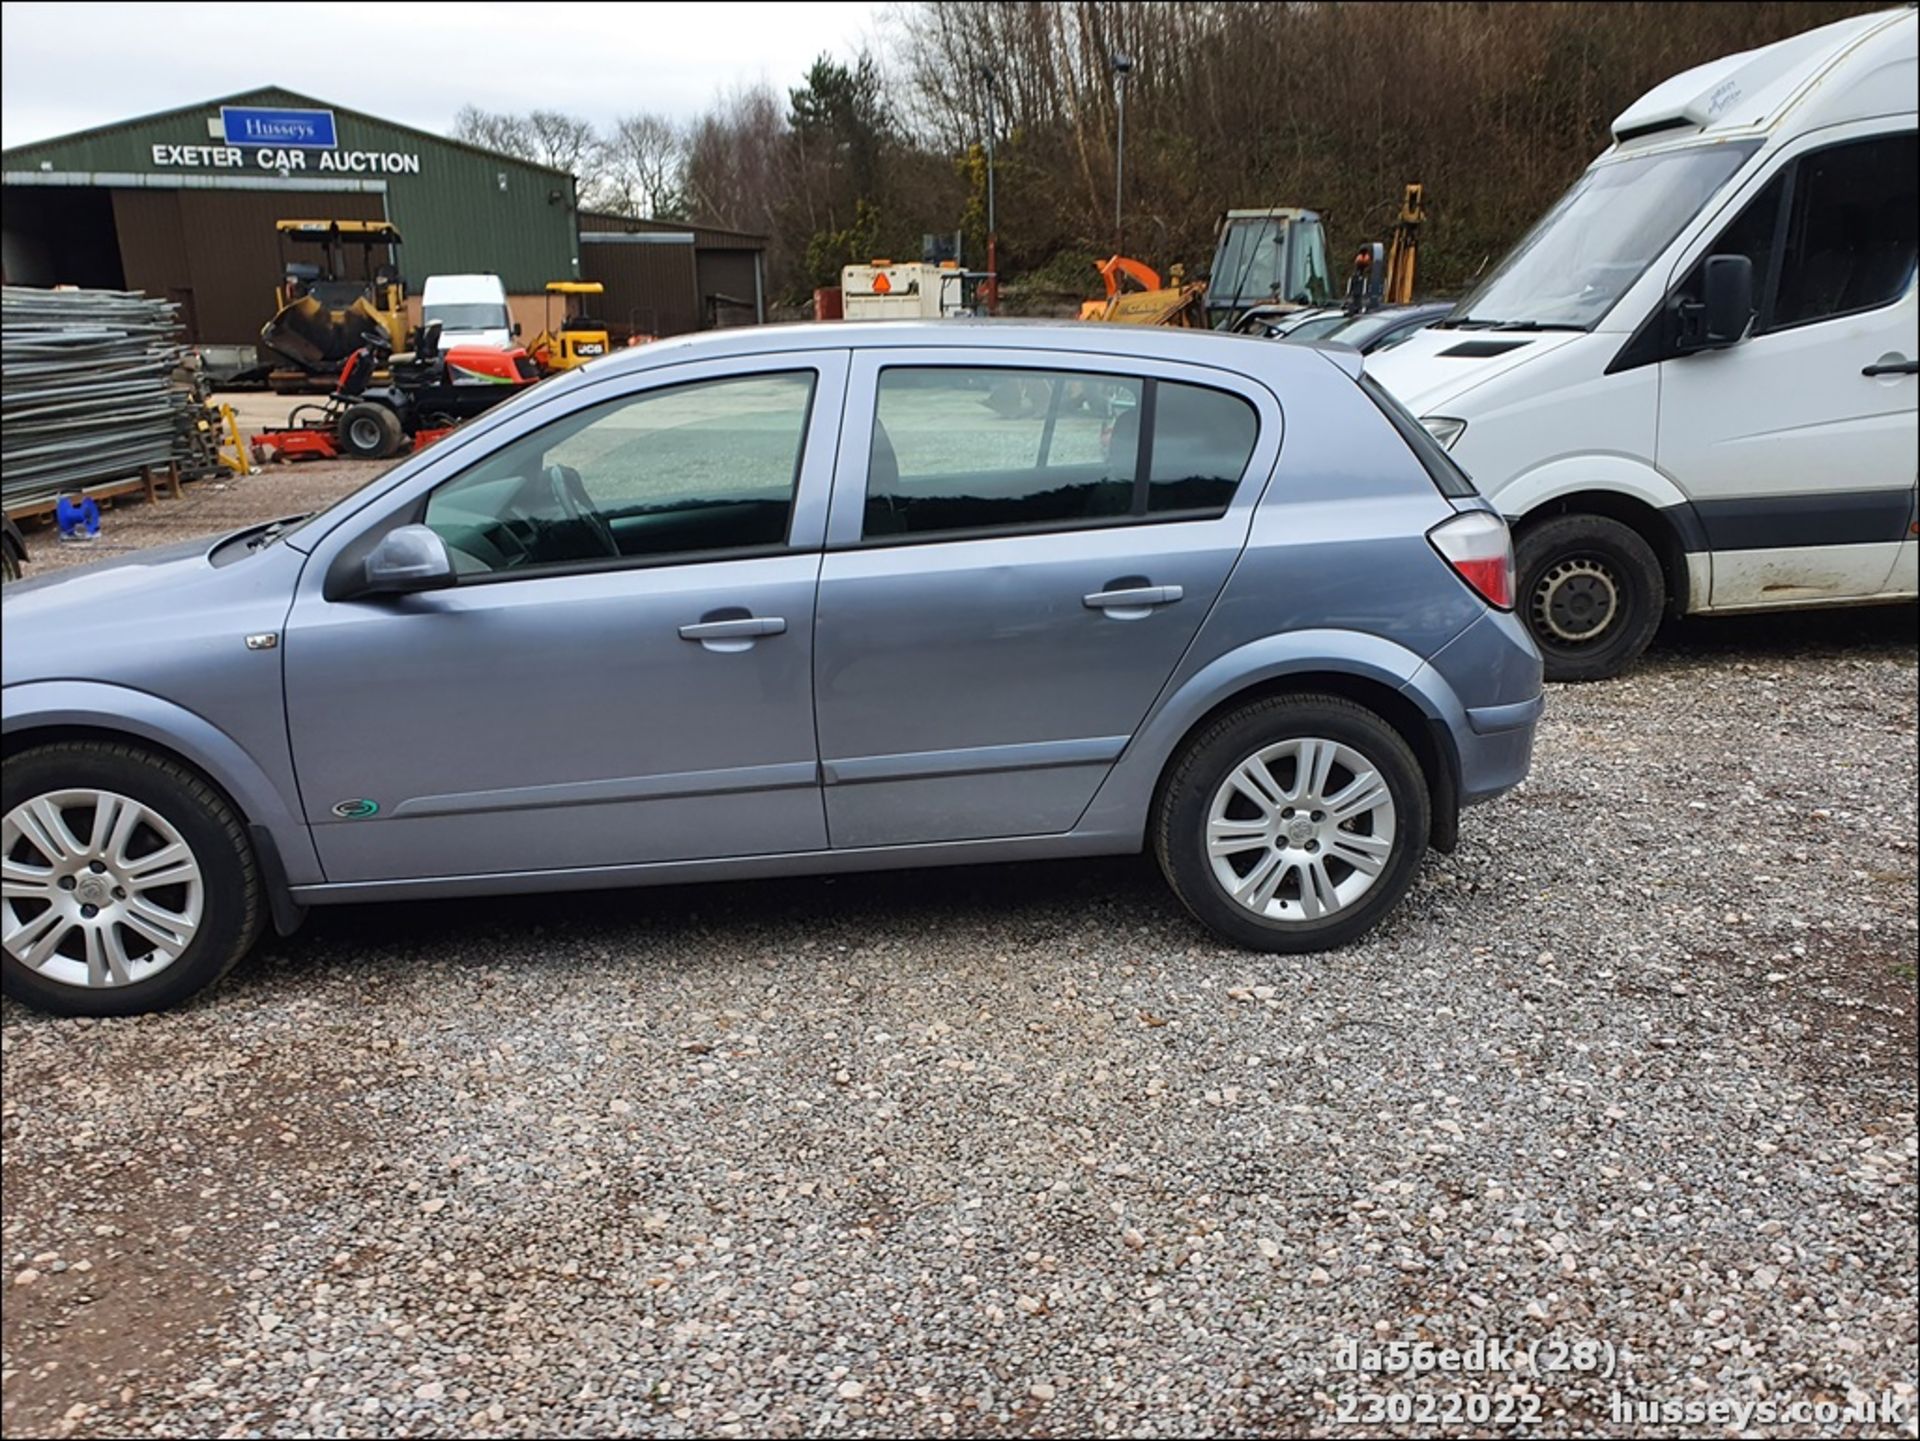 06/56 VAUXHALL ASTRA ACTIVE - 1598cc 5dr Hatchback (Silver) - Image 26 of 42